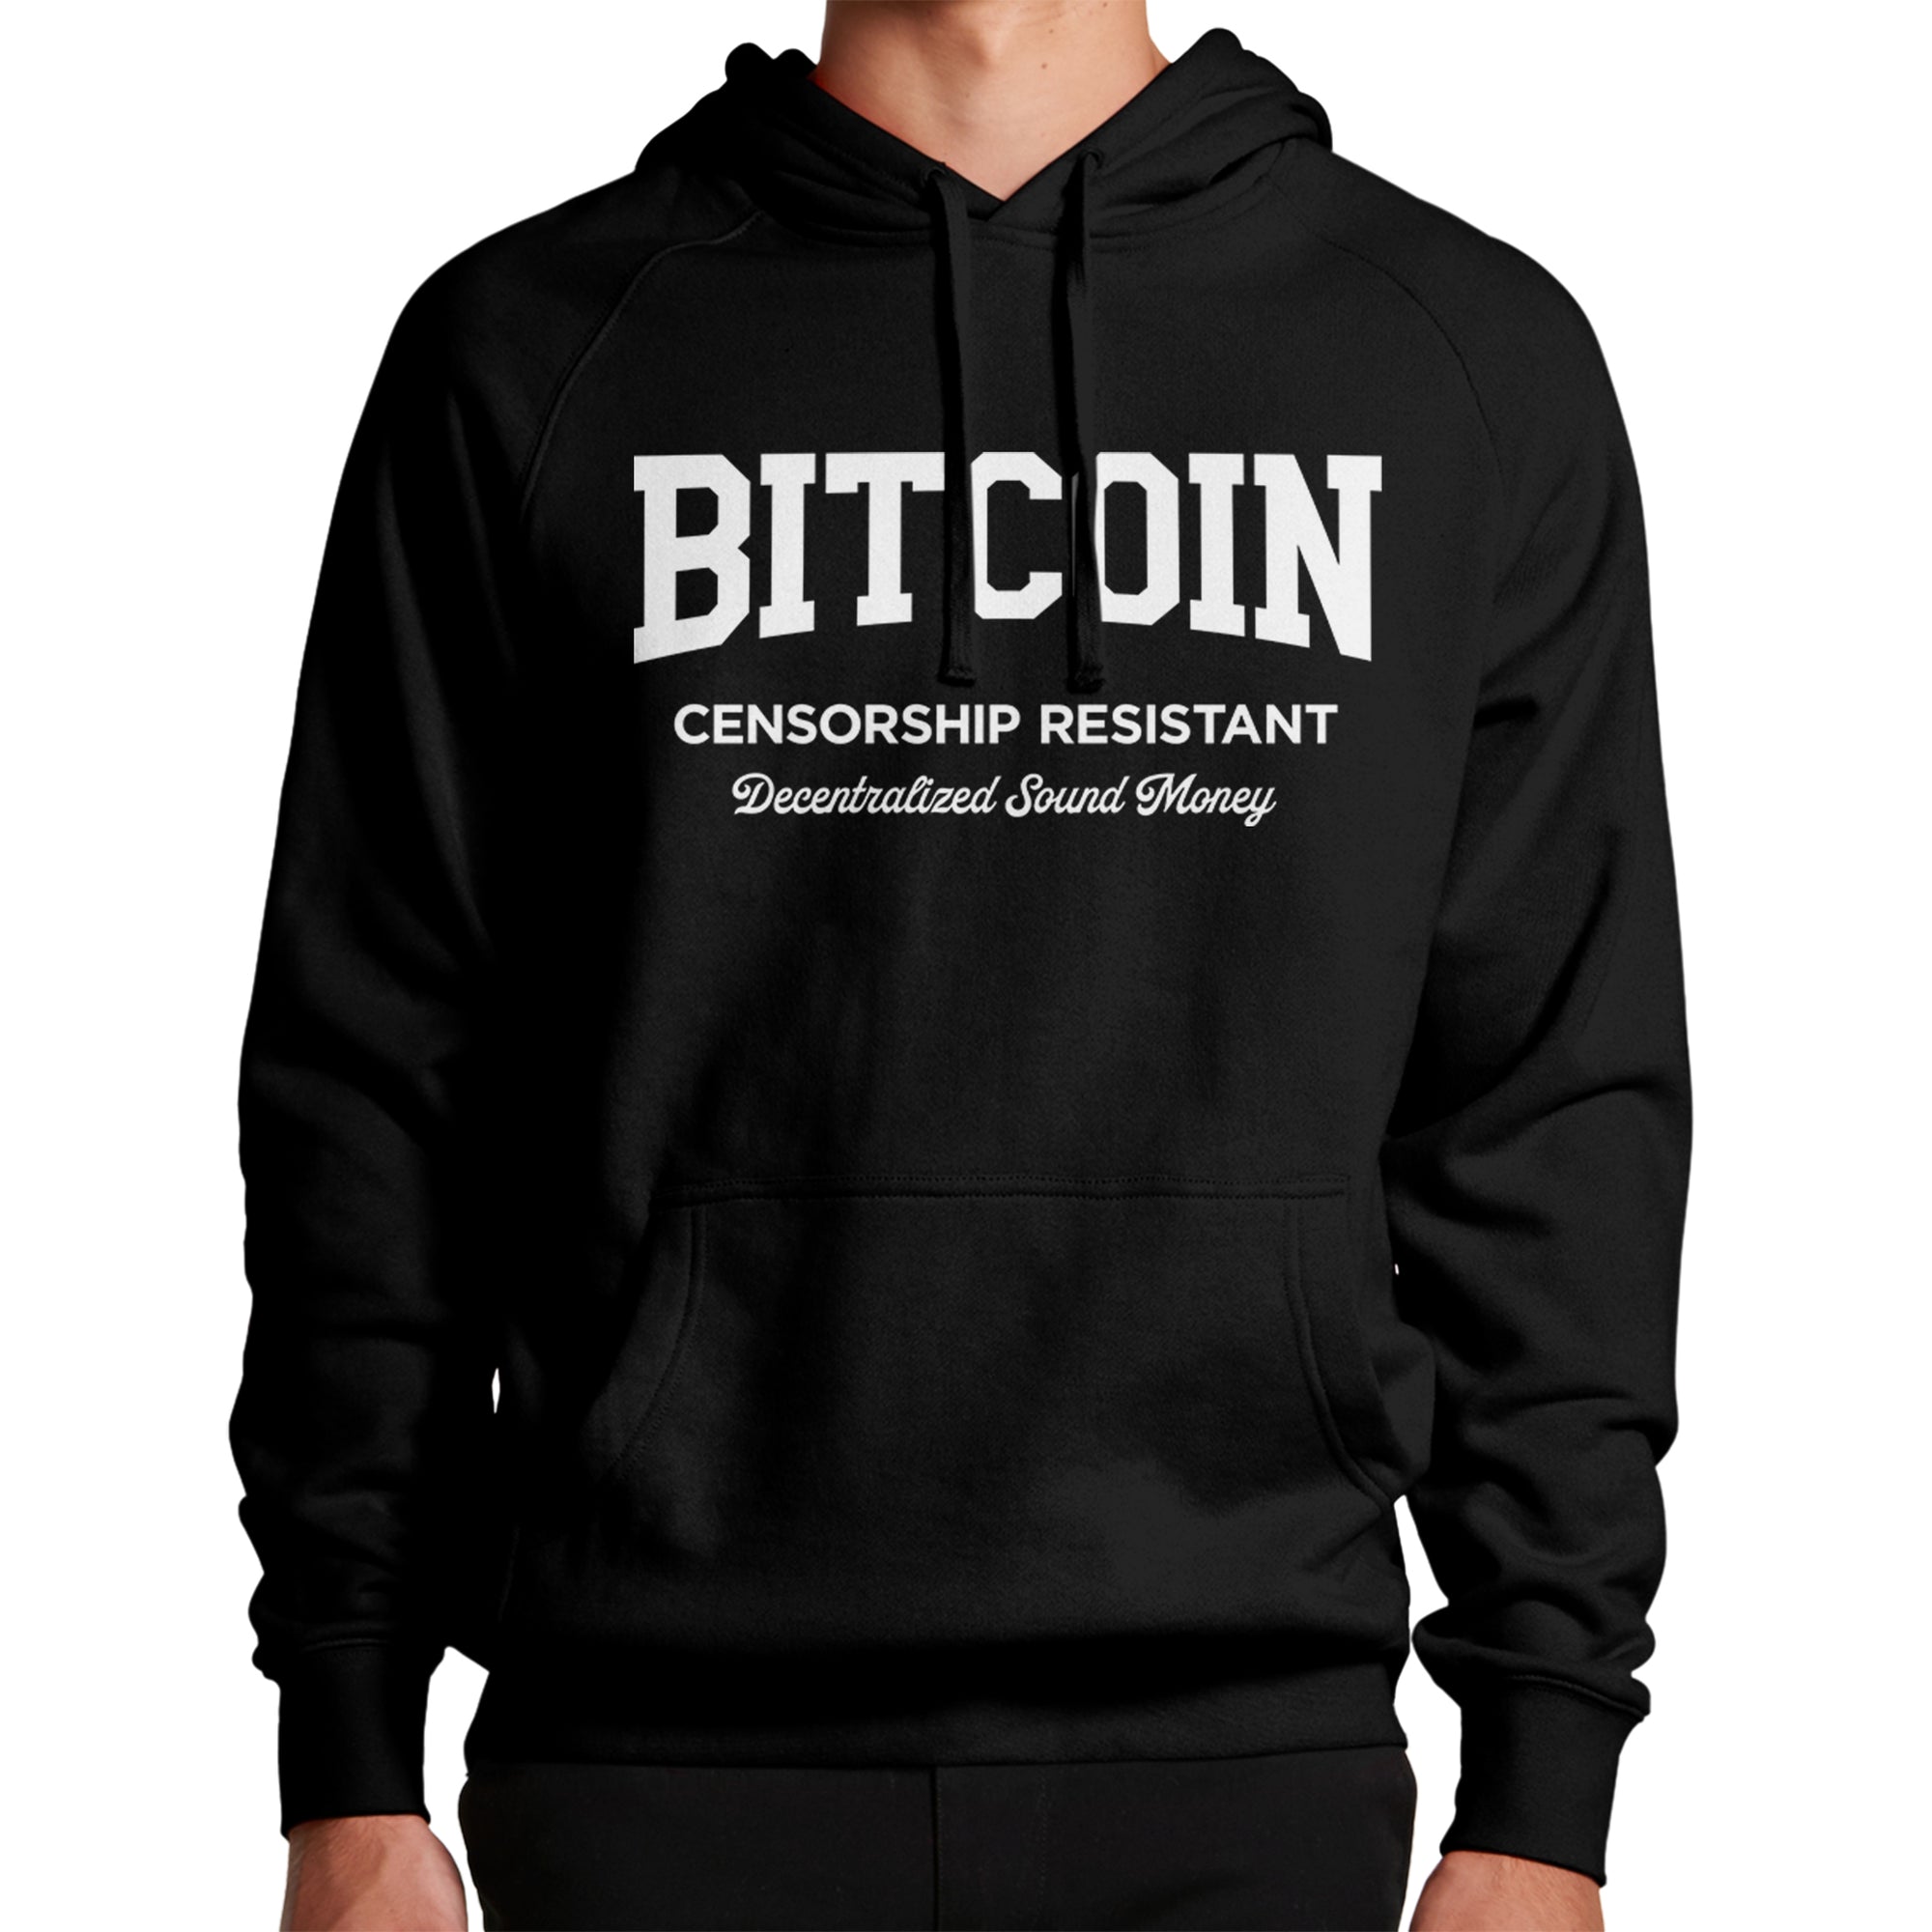 Bitcoin Merchandise - Bitcoin Censorship Resistant Hoodie. Model image (front view).